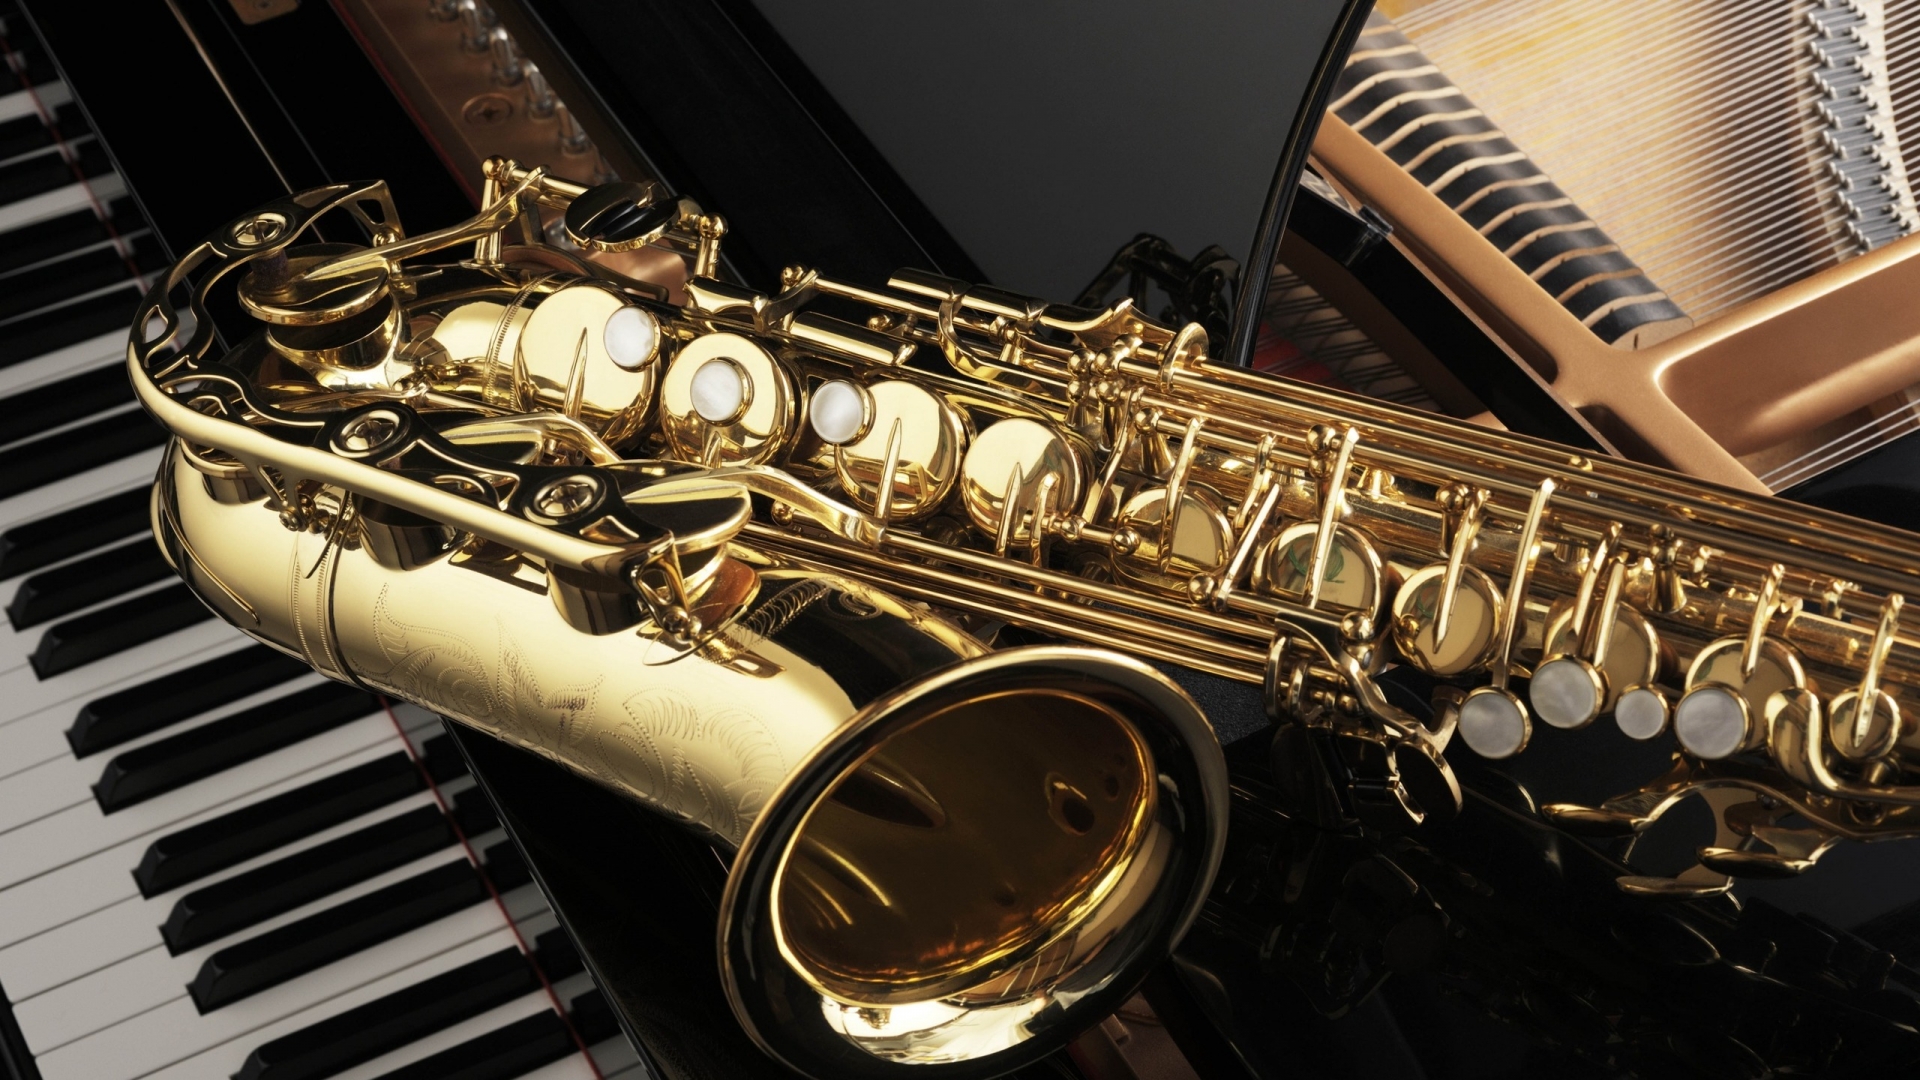 Saxophone and Piano for 1920 x 1080 HDTV 1080p resolution